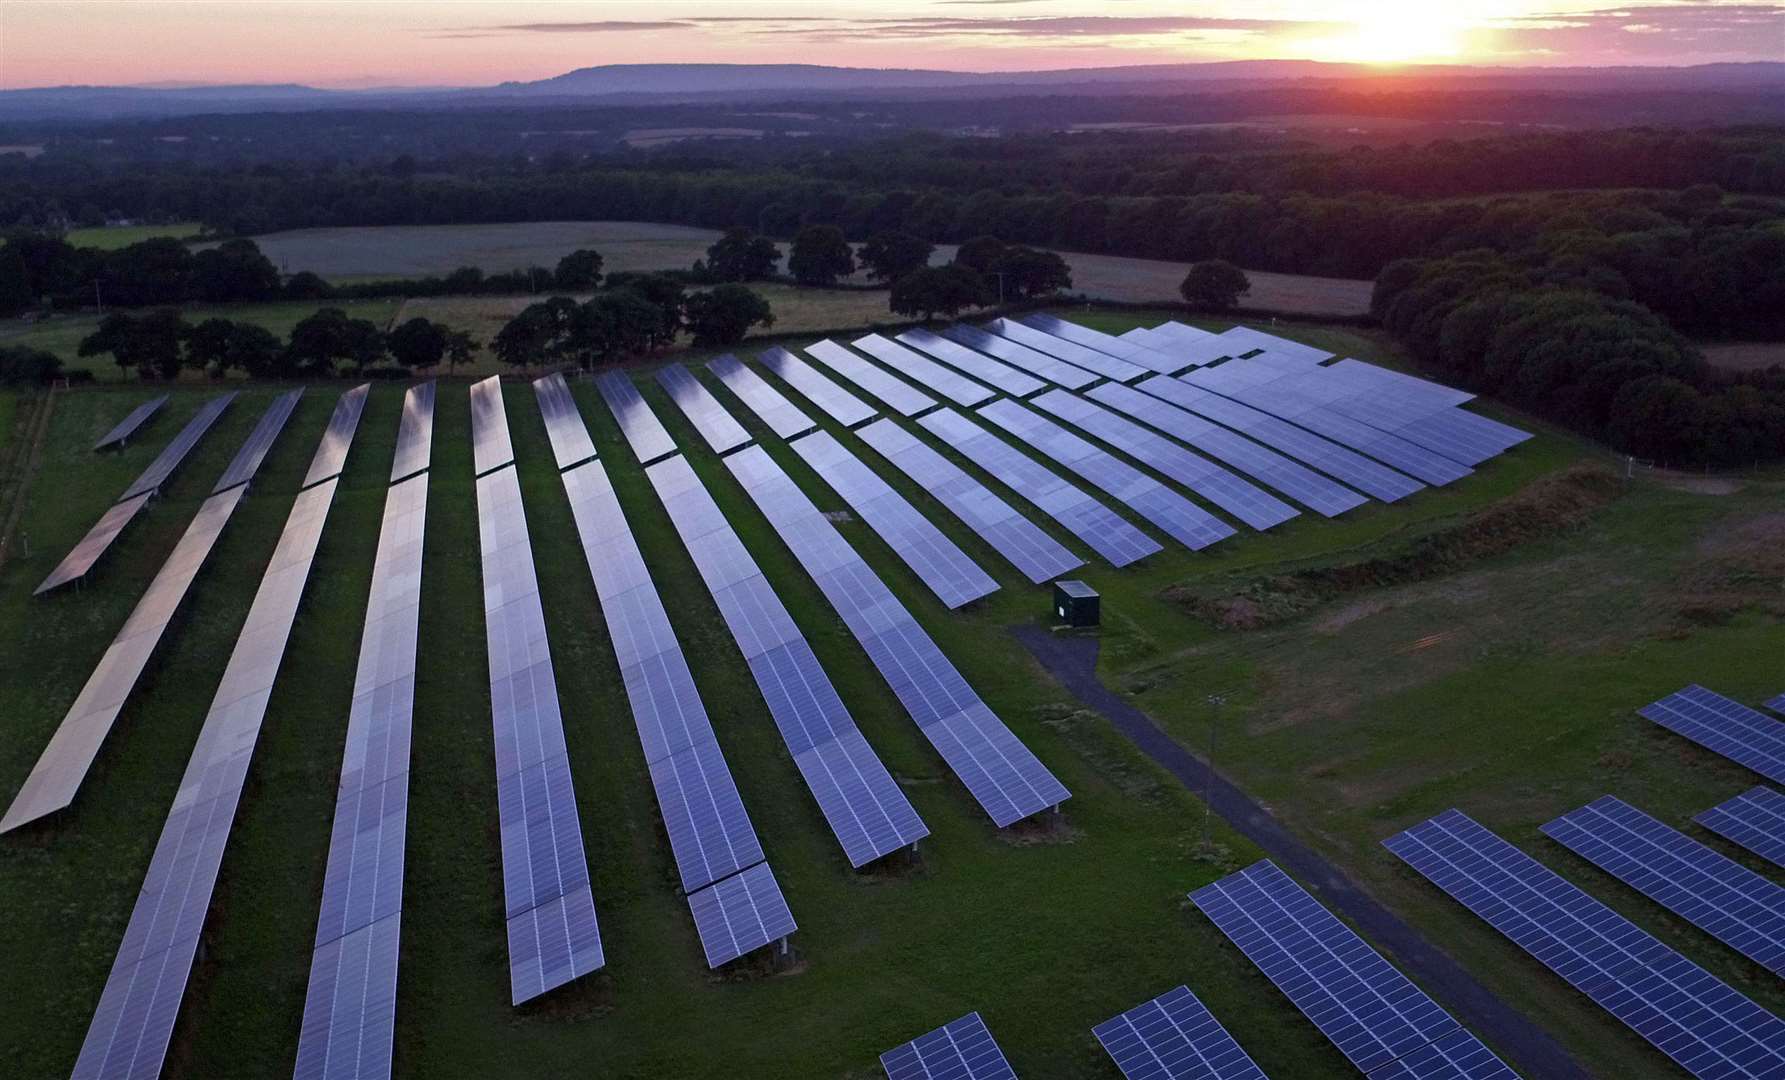 The huge solar panel farm is due to be built in Graveney, between Whitstable and Faversham as a shift towards greener energy sources